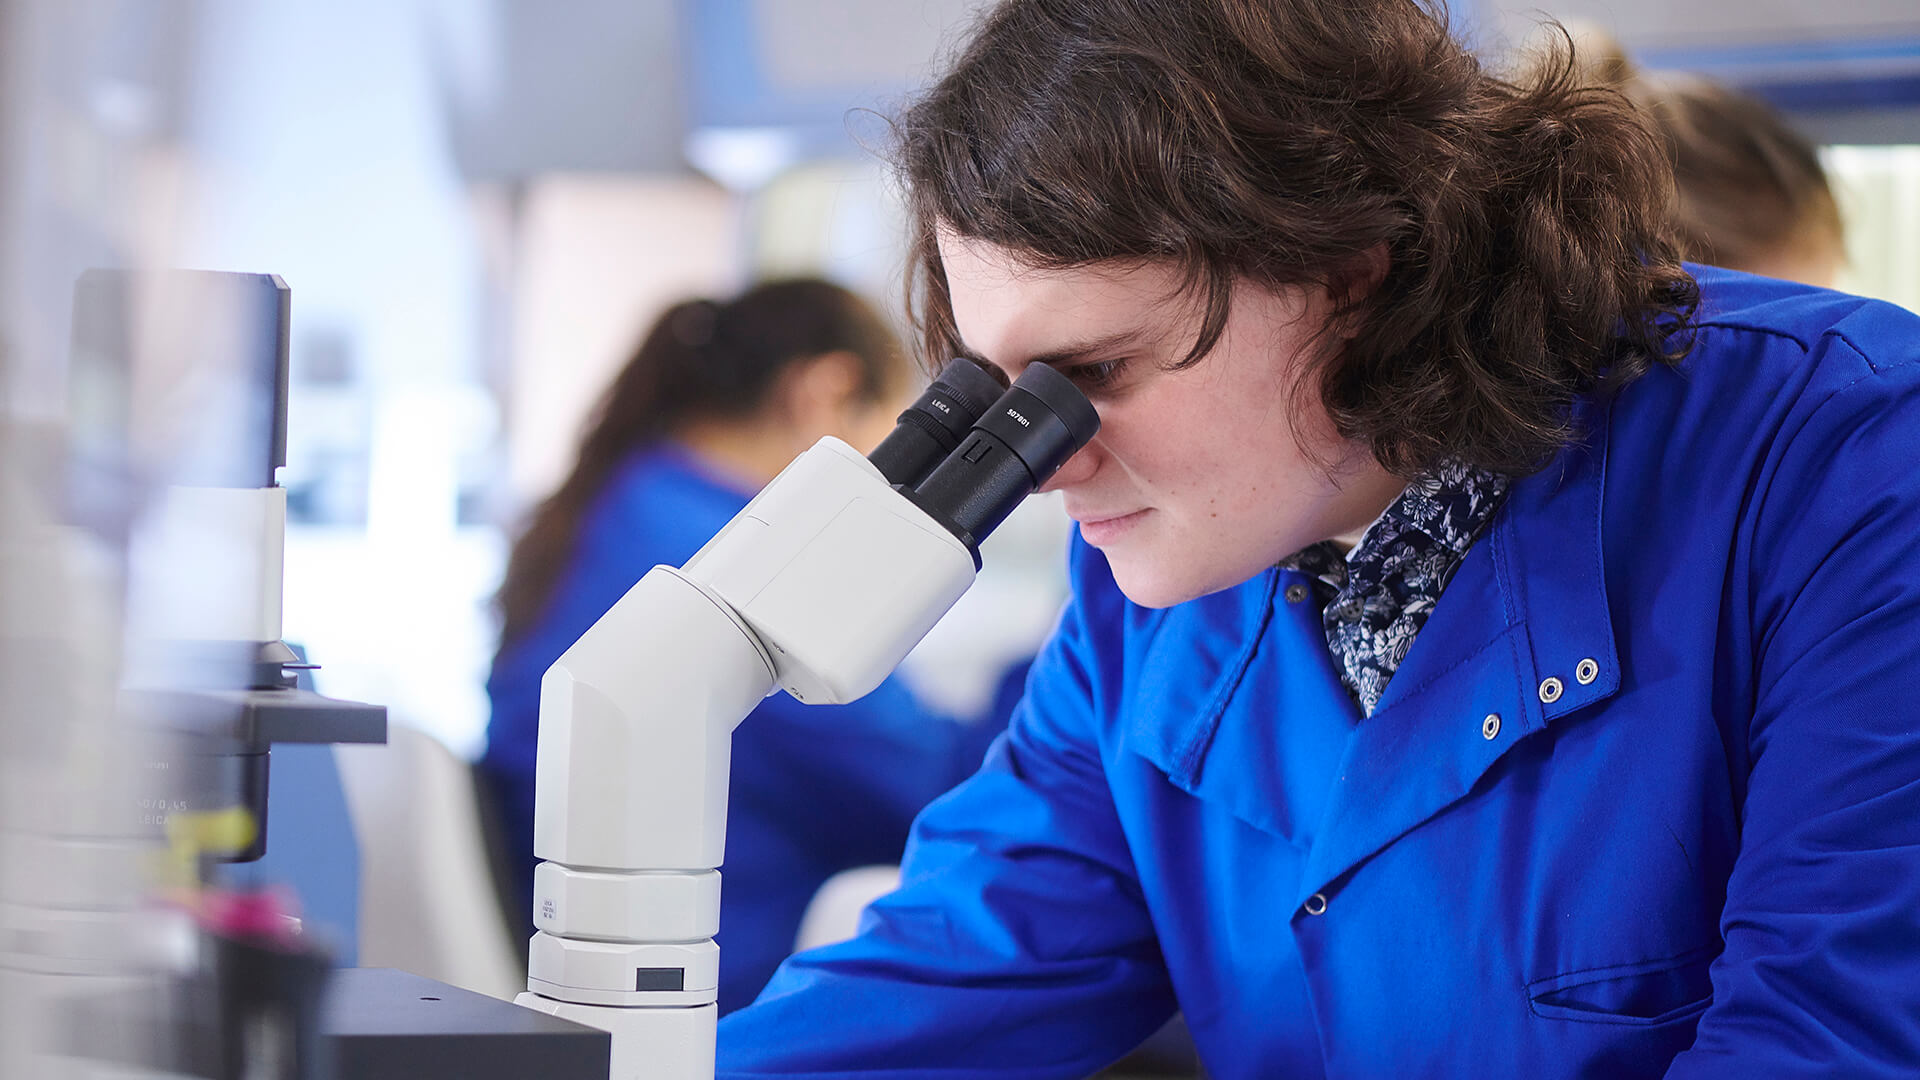 A student examines cells through an inverted microscope.